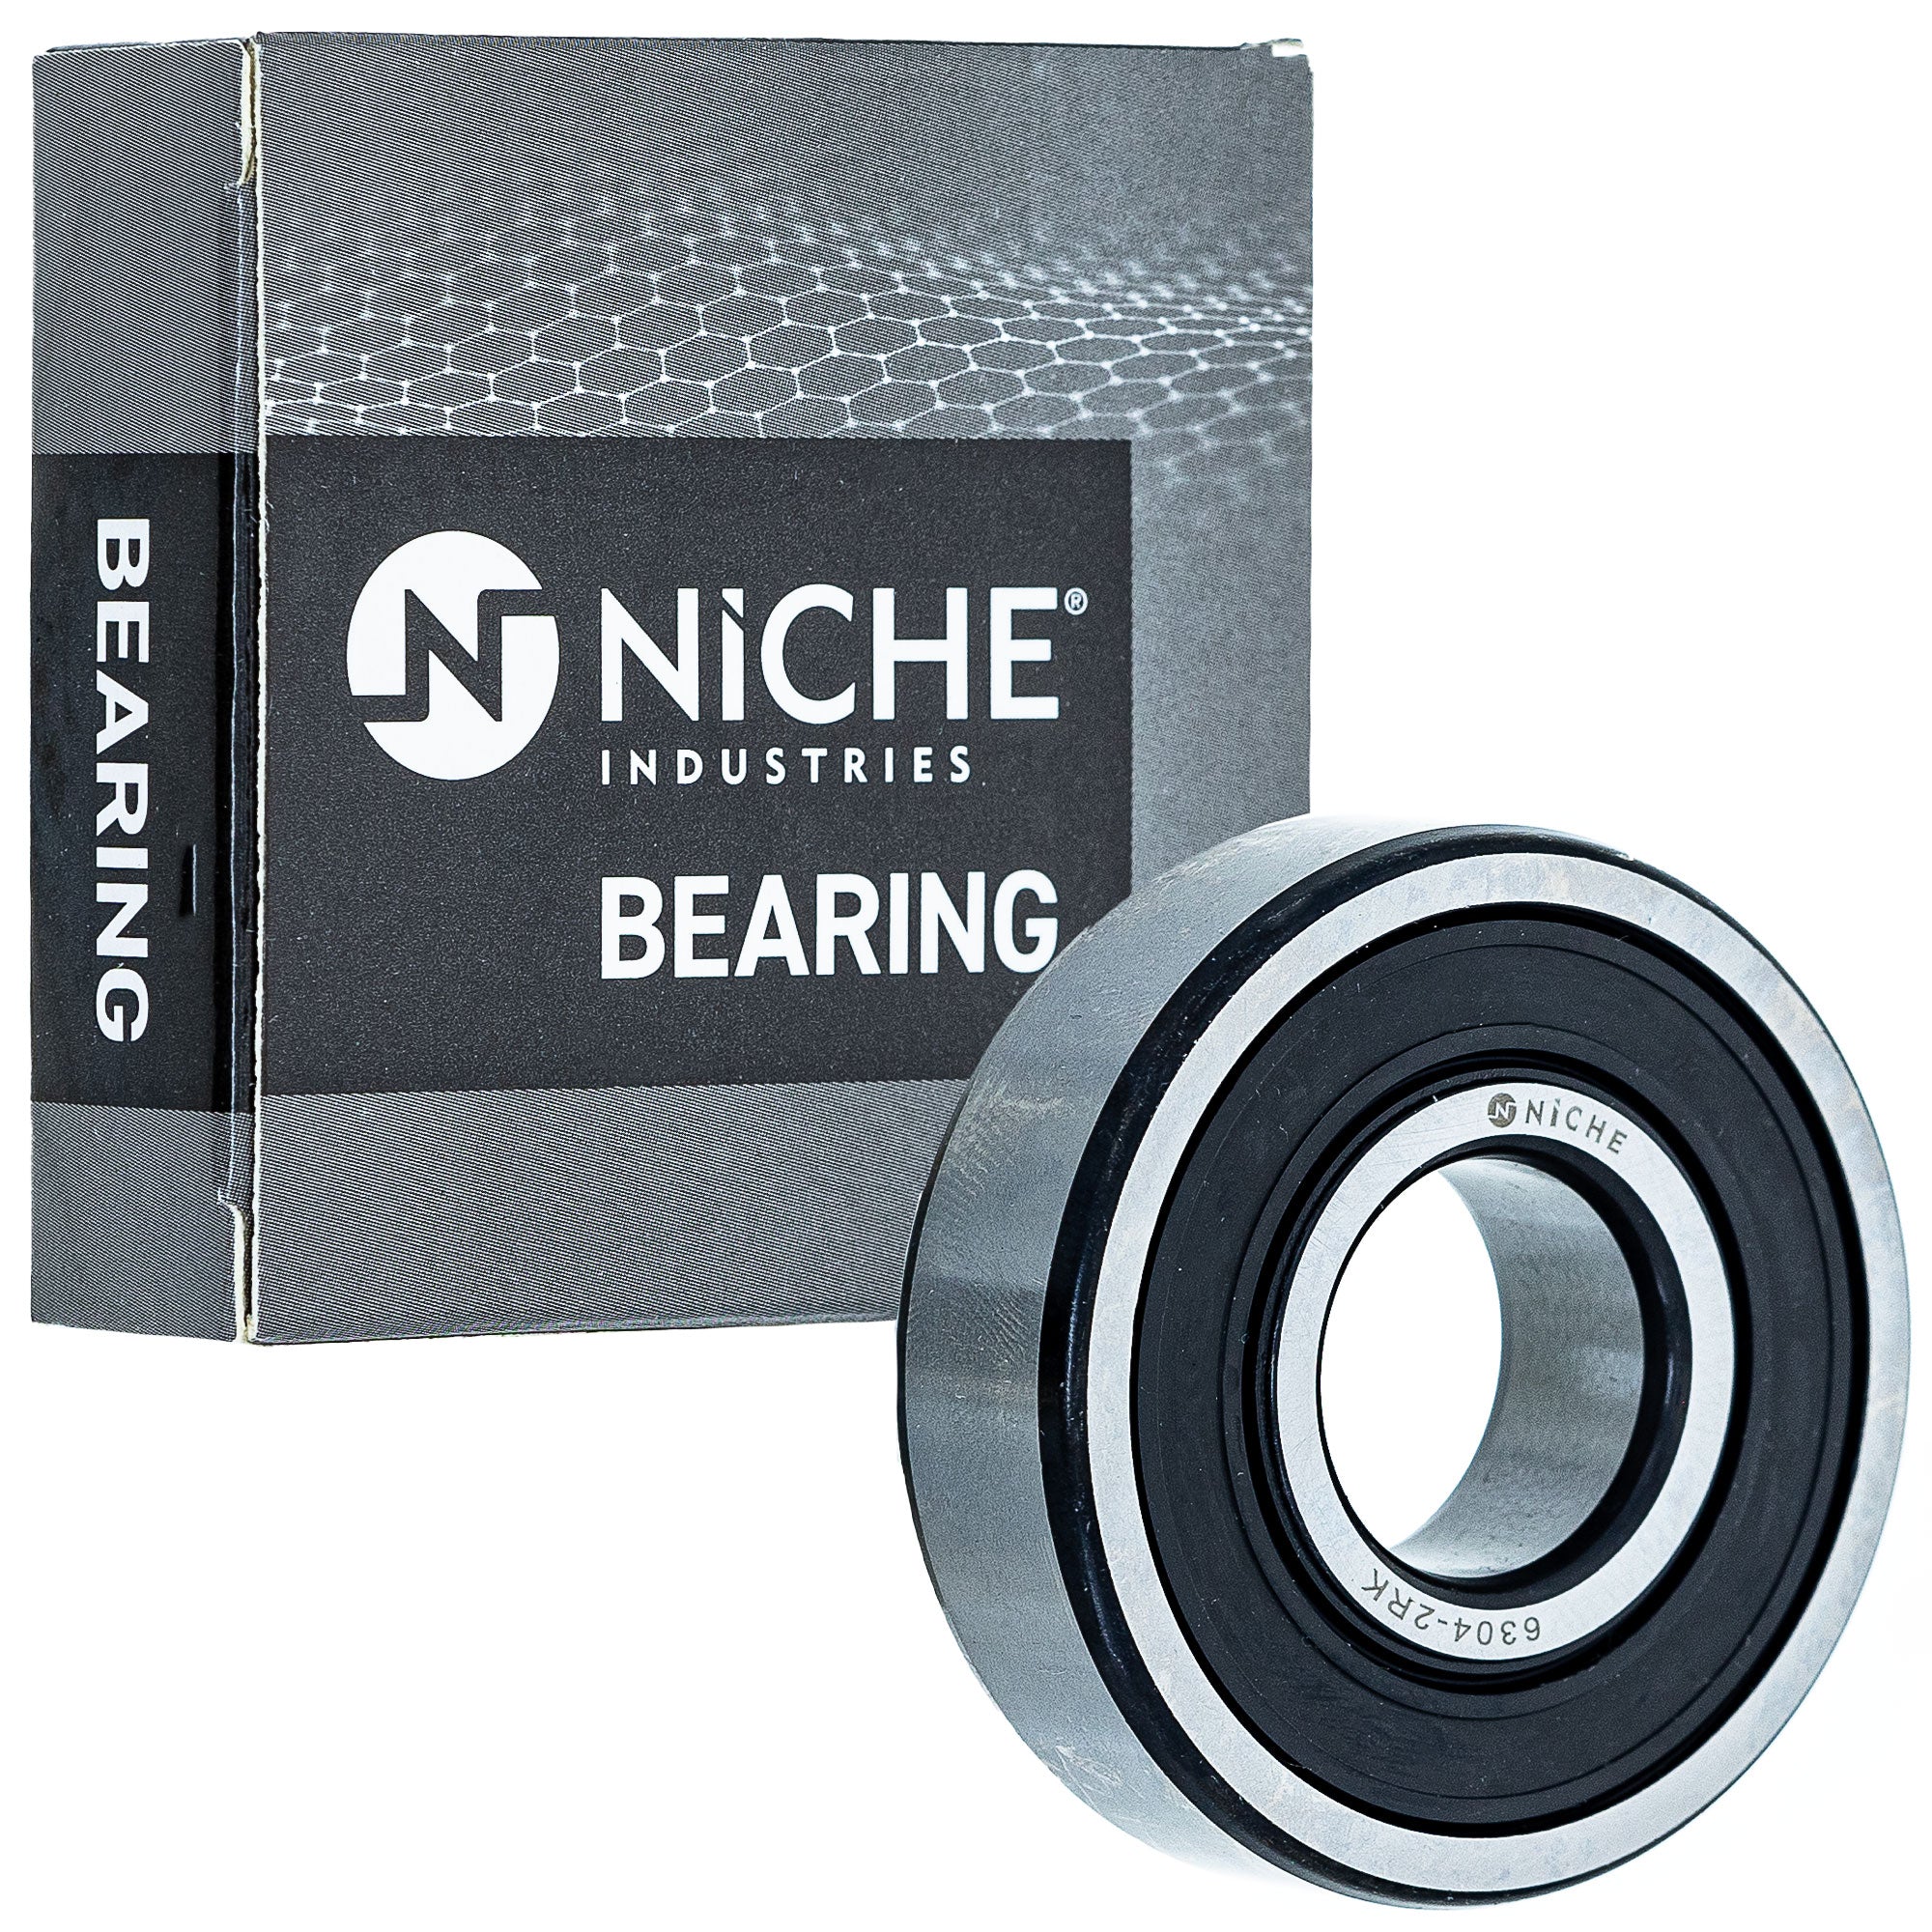 NICHE 519-CBB2343R Bearing 2-Pack for zOTHER Valkyrie Super Sabre